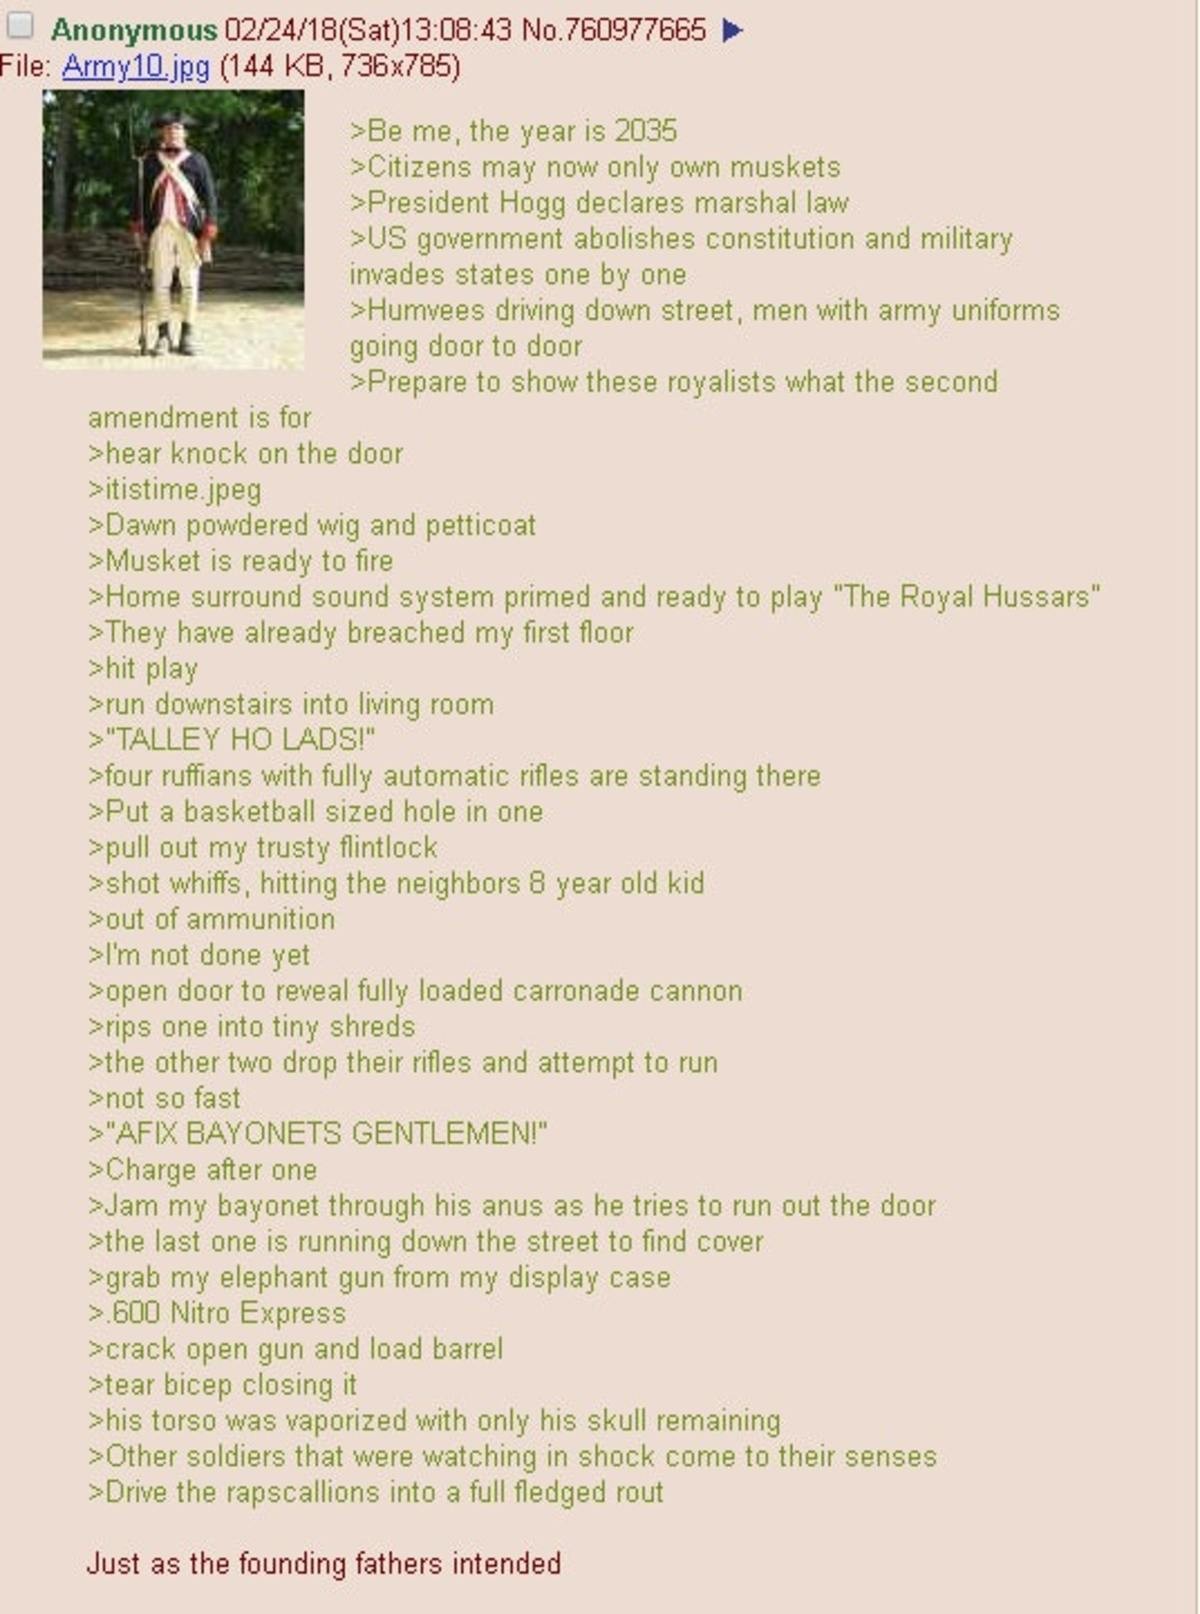 Anon is a Patriot